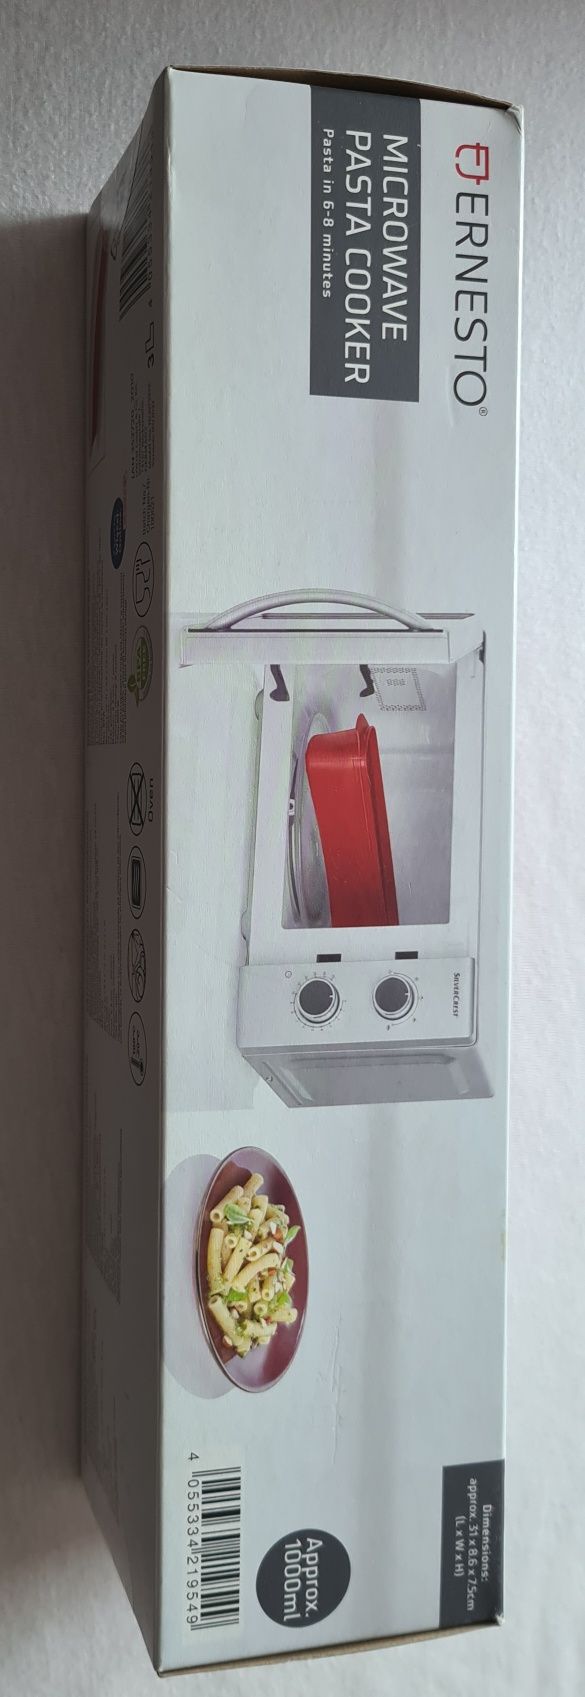 microwave pasta cooker